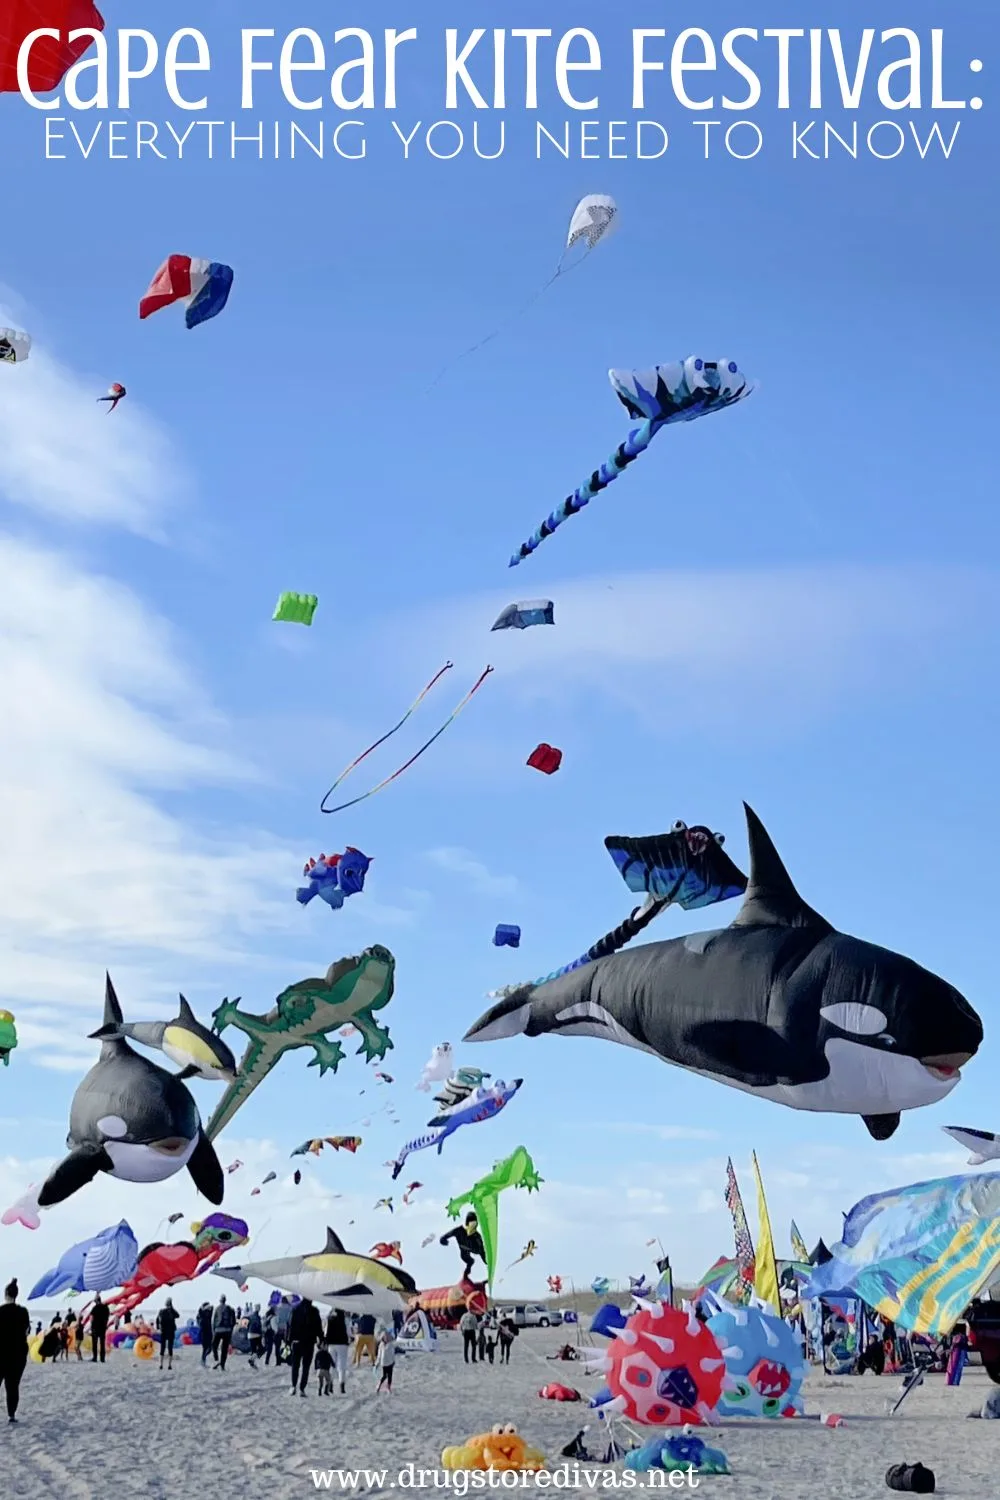 A bunch of kites in the sky above a beach with the words 